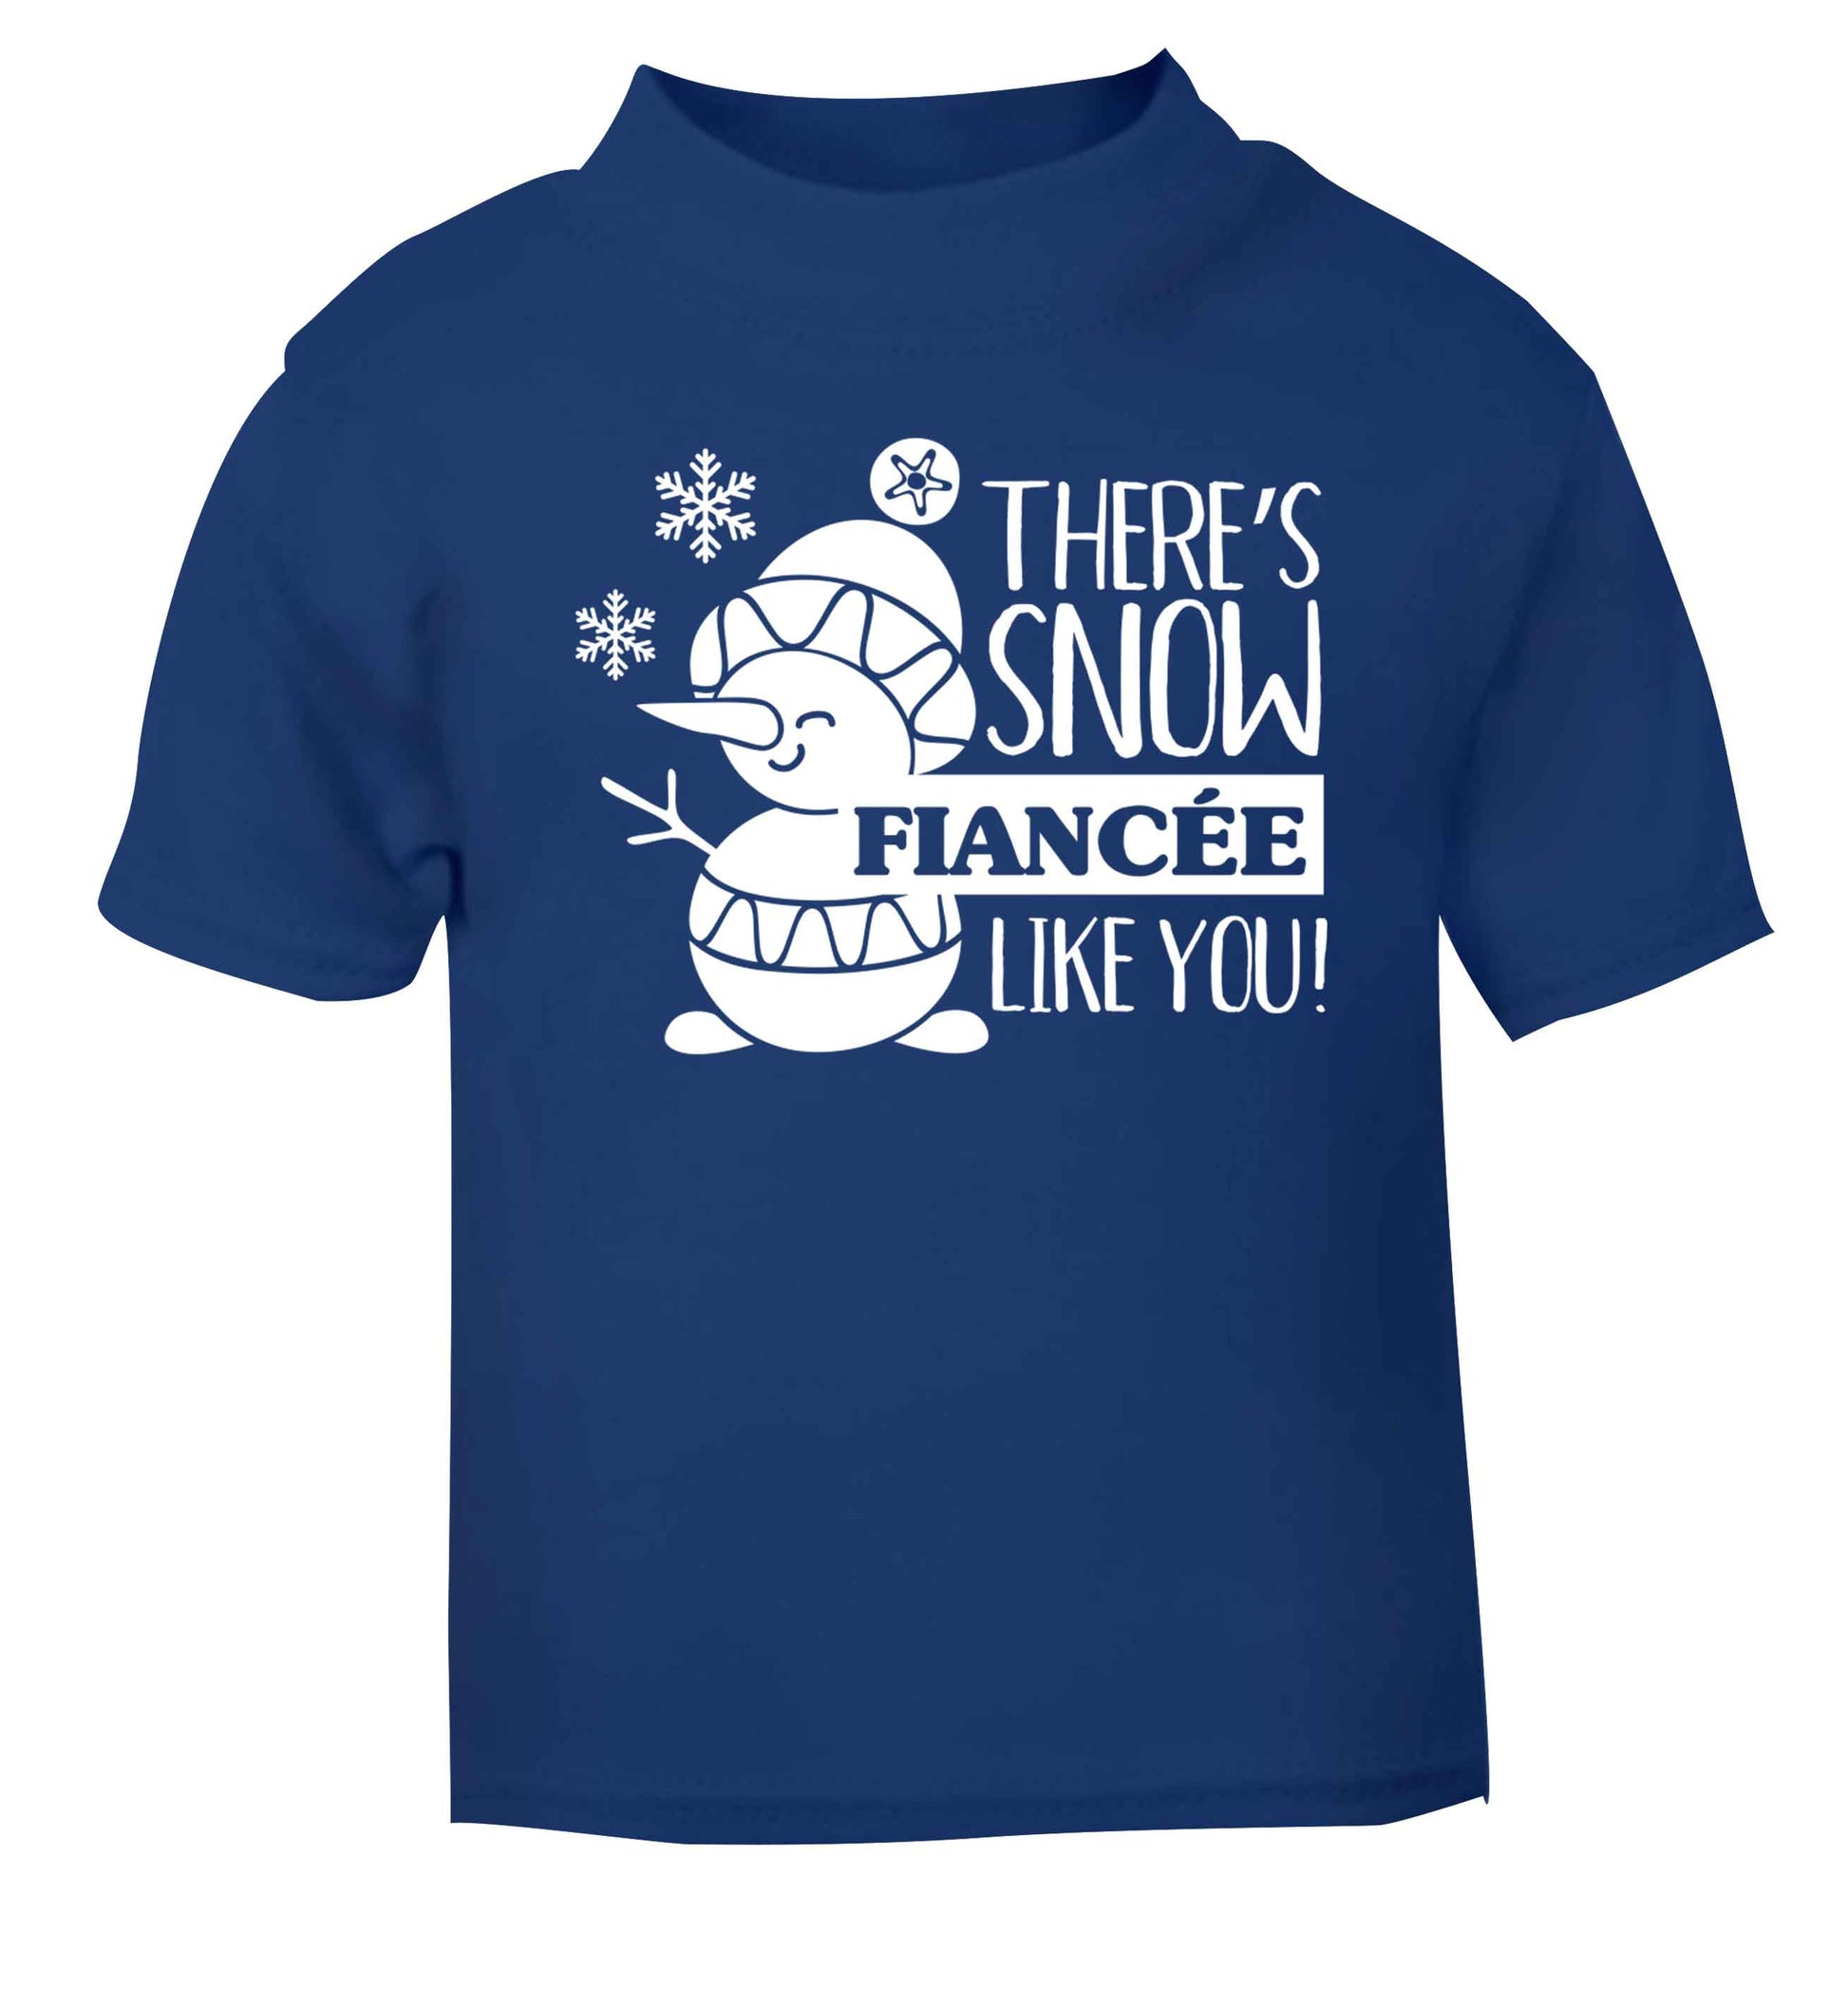 There's snow fiancee like you blue baby toddler Tshirt 2 Years